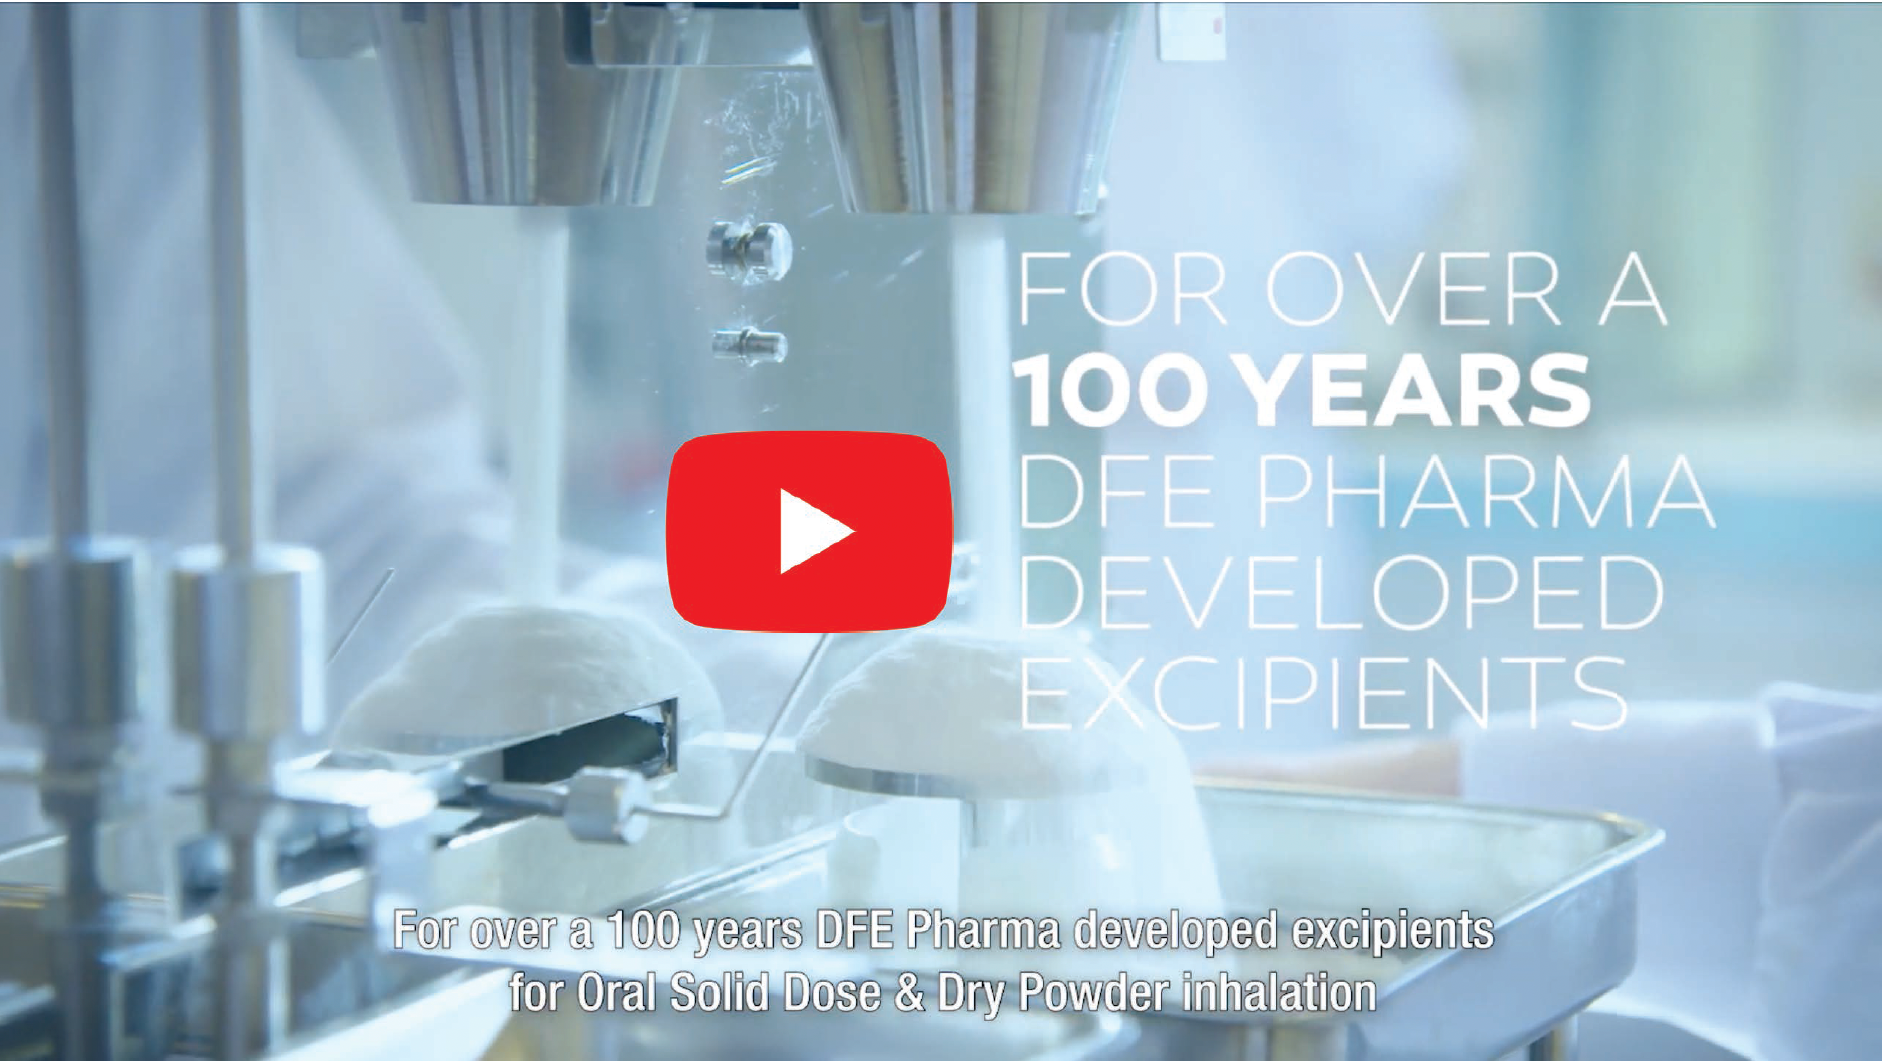 Load video: DFE Pharma is a global leader in pharma- and nutraceutical excipient solutions. We develop, produce, and supply the highest quality functional excipients for use in the pharmaceutical, biopharmaceutical, and nutraceutical industries for respiratory, oral solid dose (OSD), ophthalmic and parenteral formulations. Our excipients are used in numerous medicinal and nutraceutical products, including COVID-19 vaccines and - treatments.